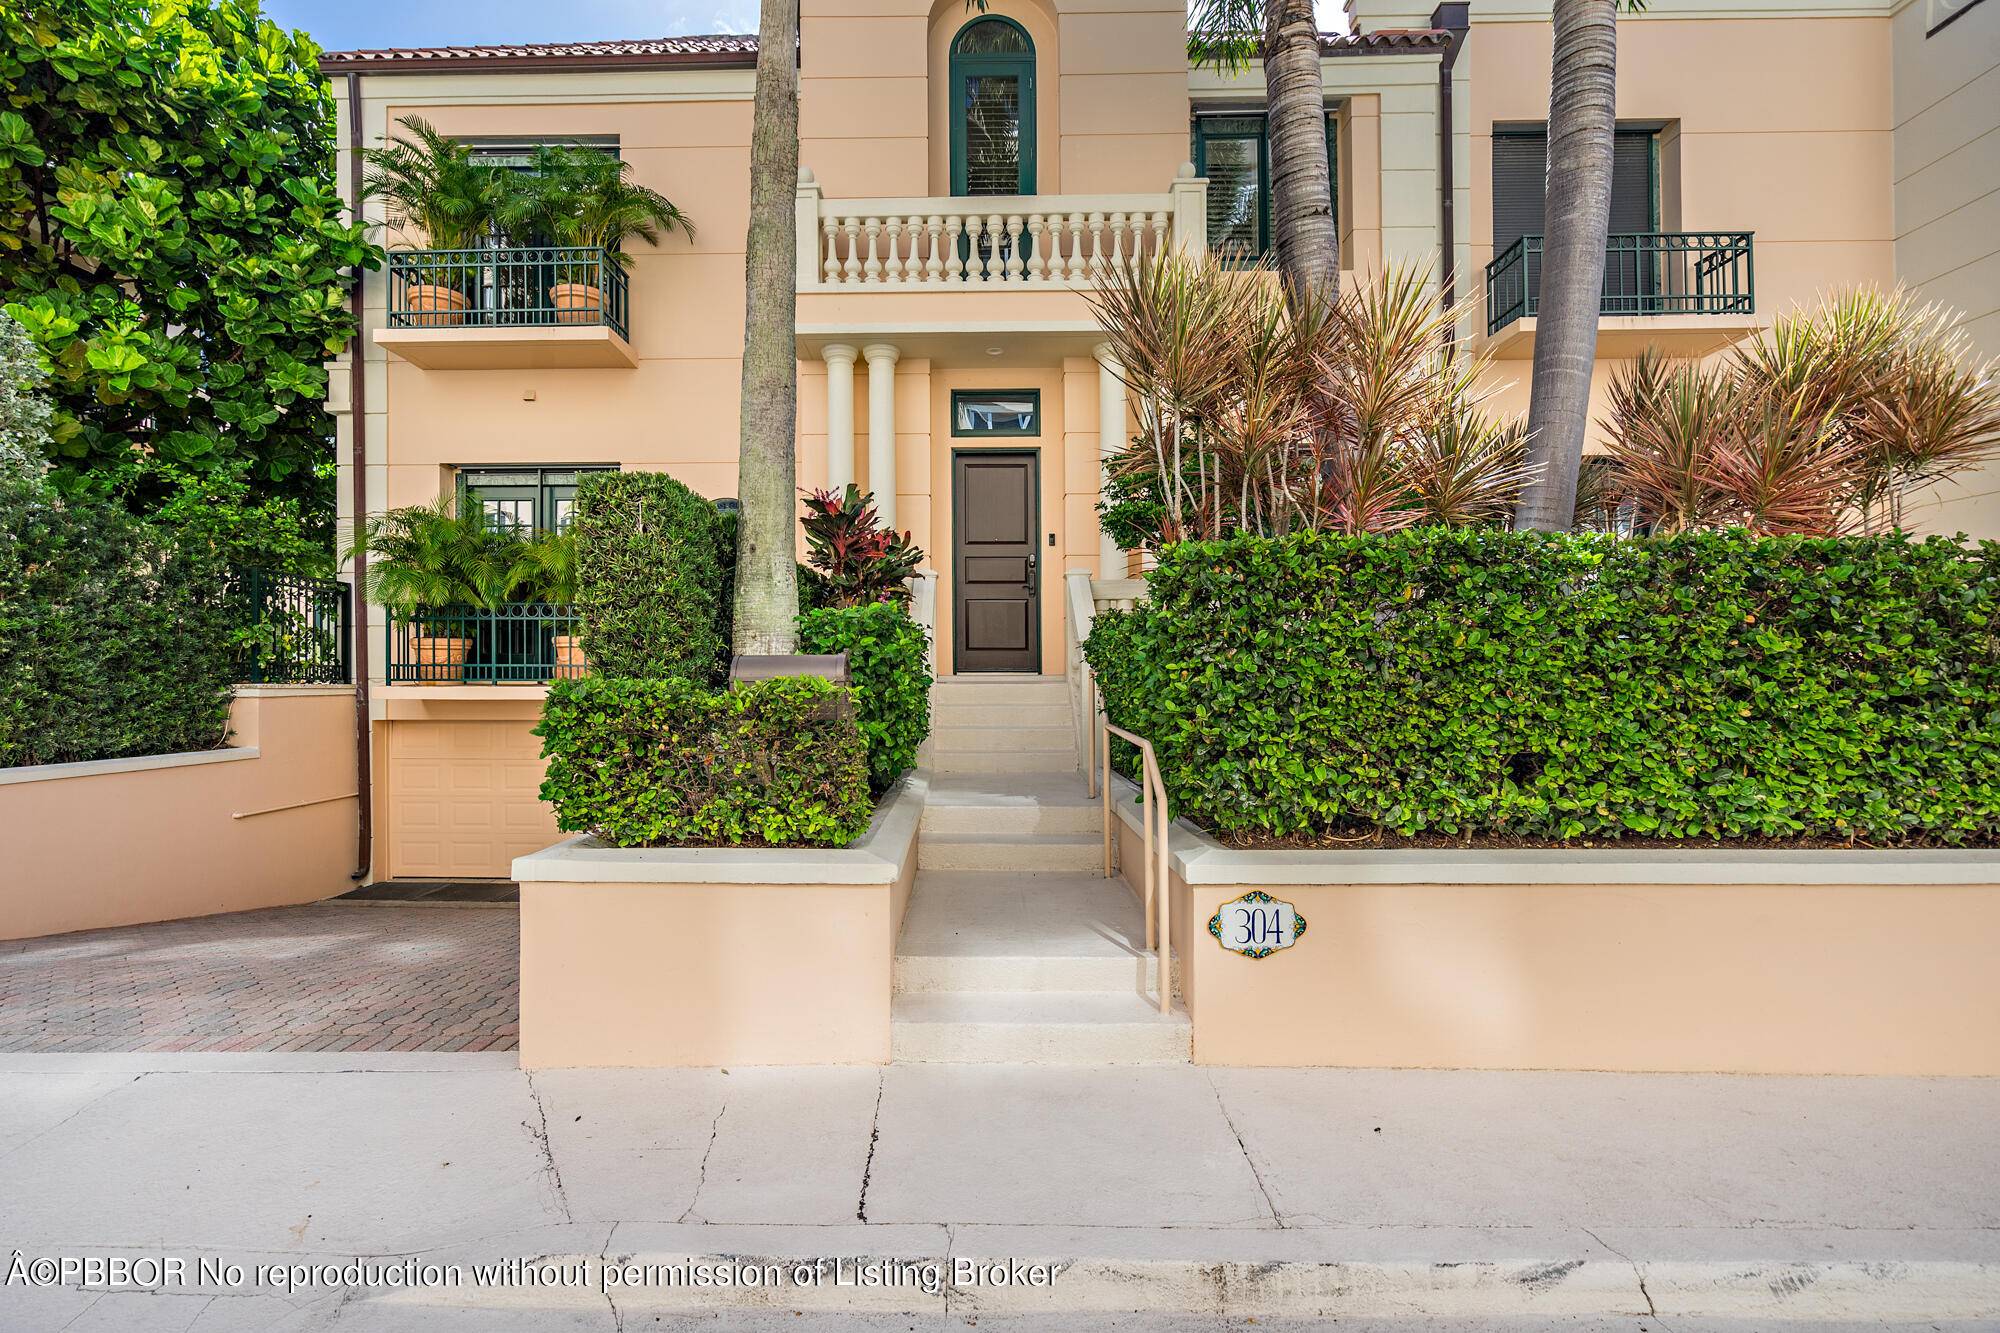 Welcome to 304 Atlantic Avenue, a rarely available 3 bedroom luxury townhome just steps away from the intracoastal.